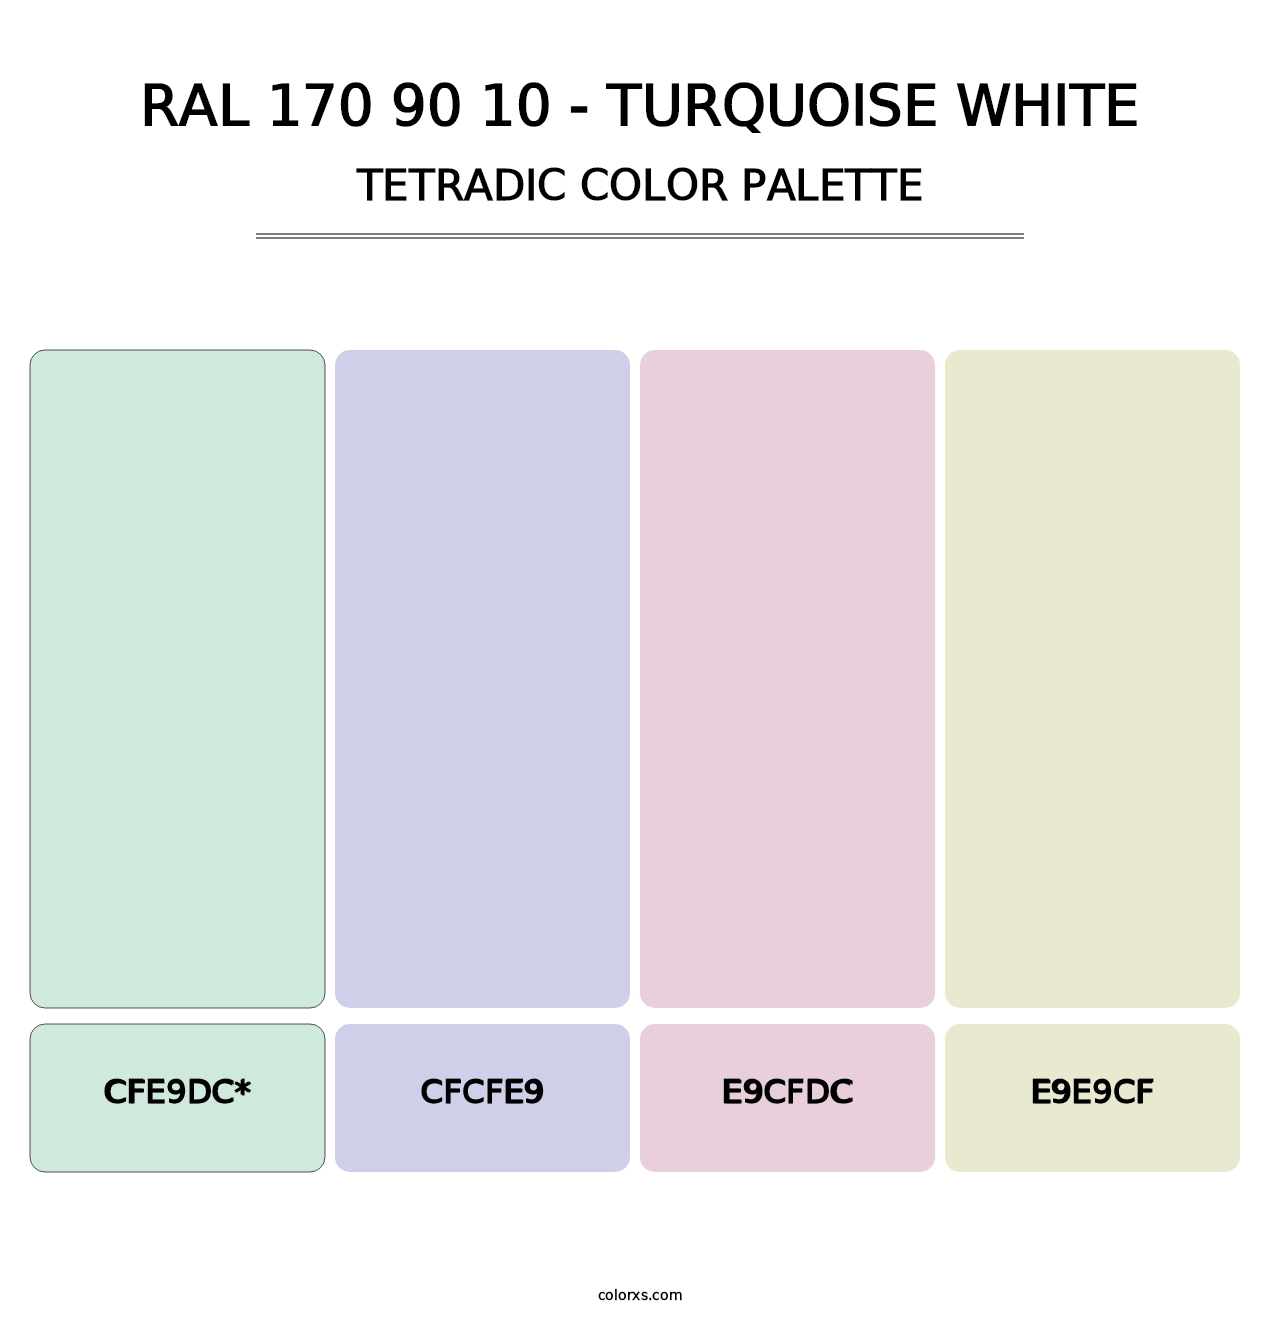 RAL 170 90 10 - Turquoise White - Tetradic Color Palette